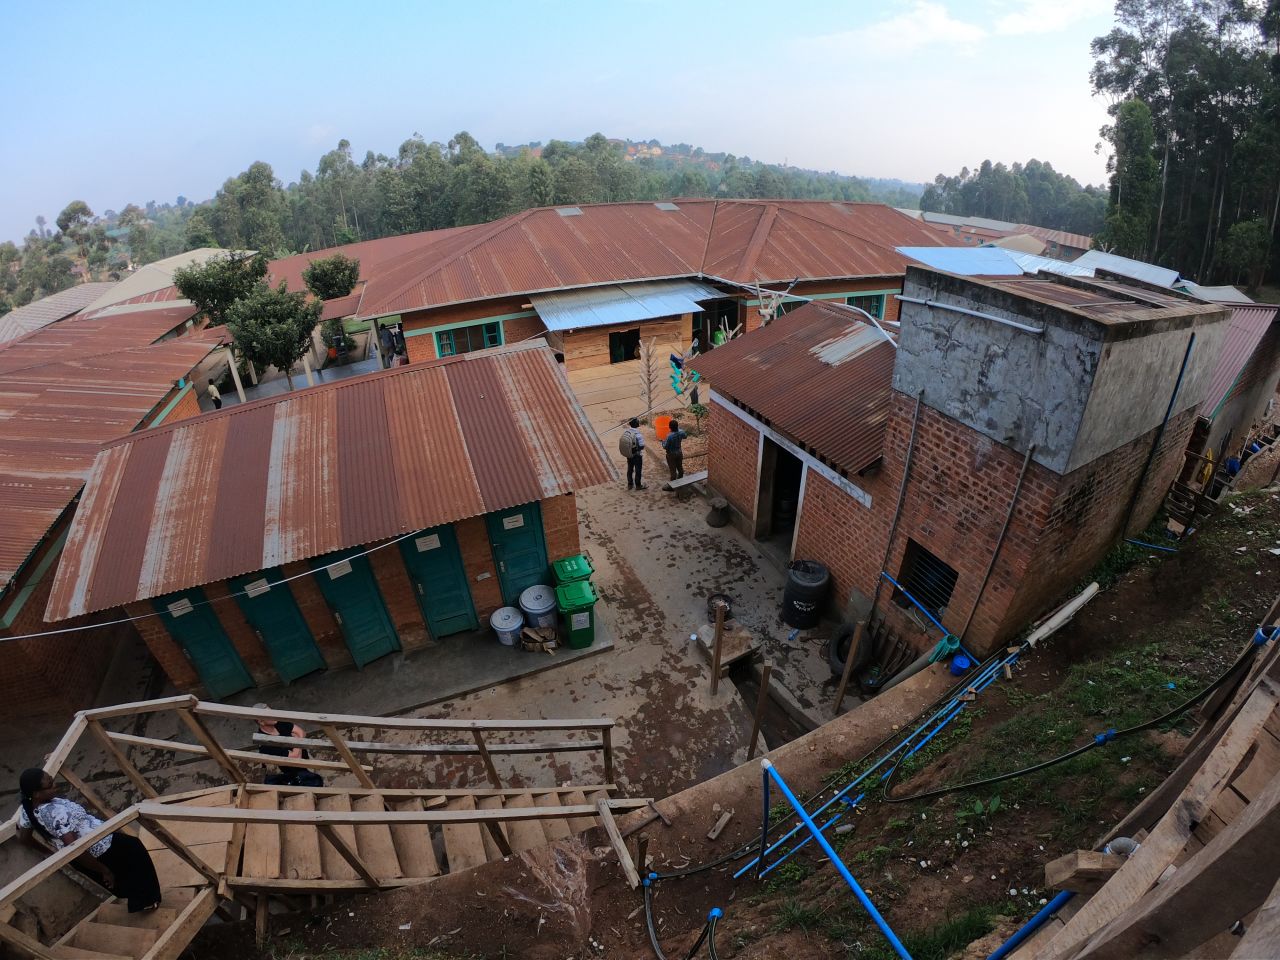 NGOs like Alima are now working to integrate centers for assessing possible Ebola patients inside existing medical facilities. After a month of consultation with community members, they built this one in Butembo.